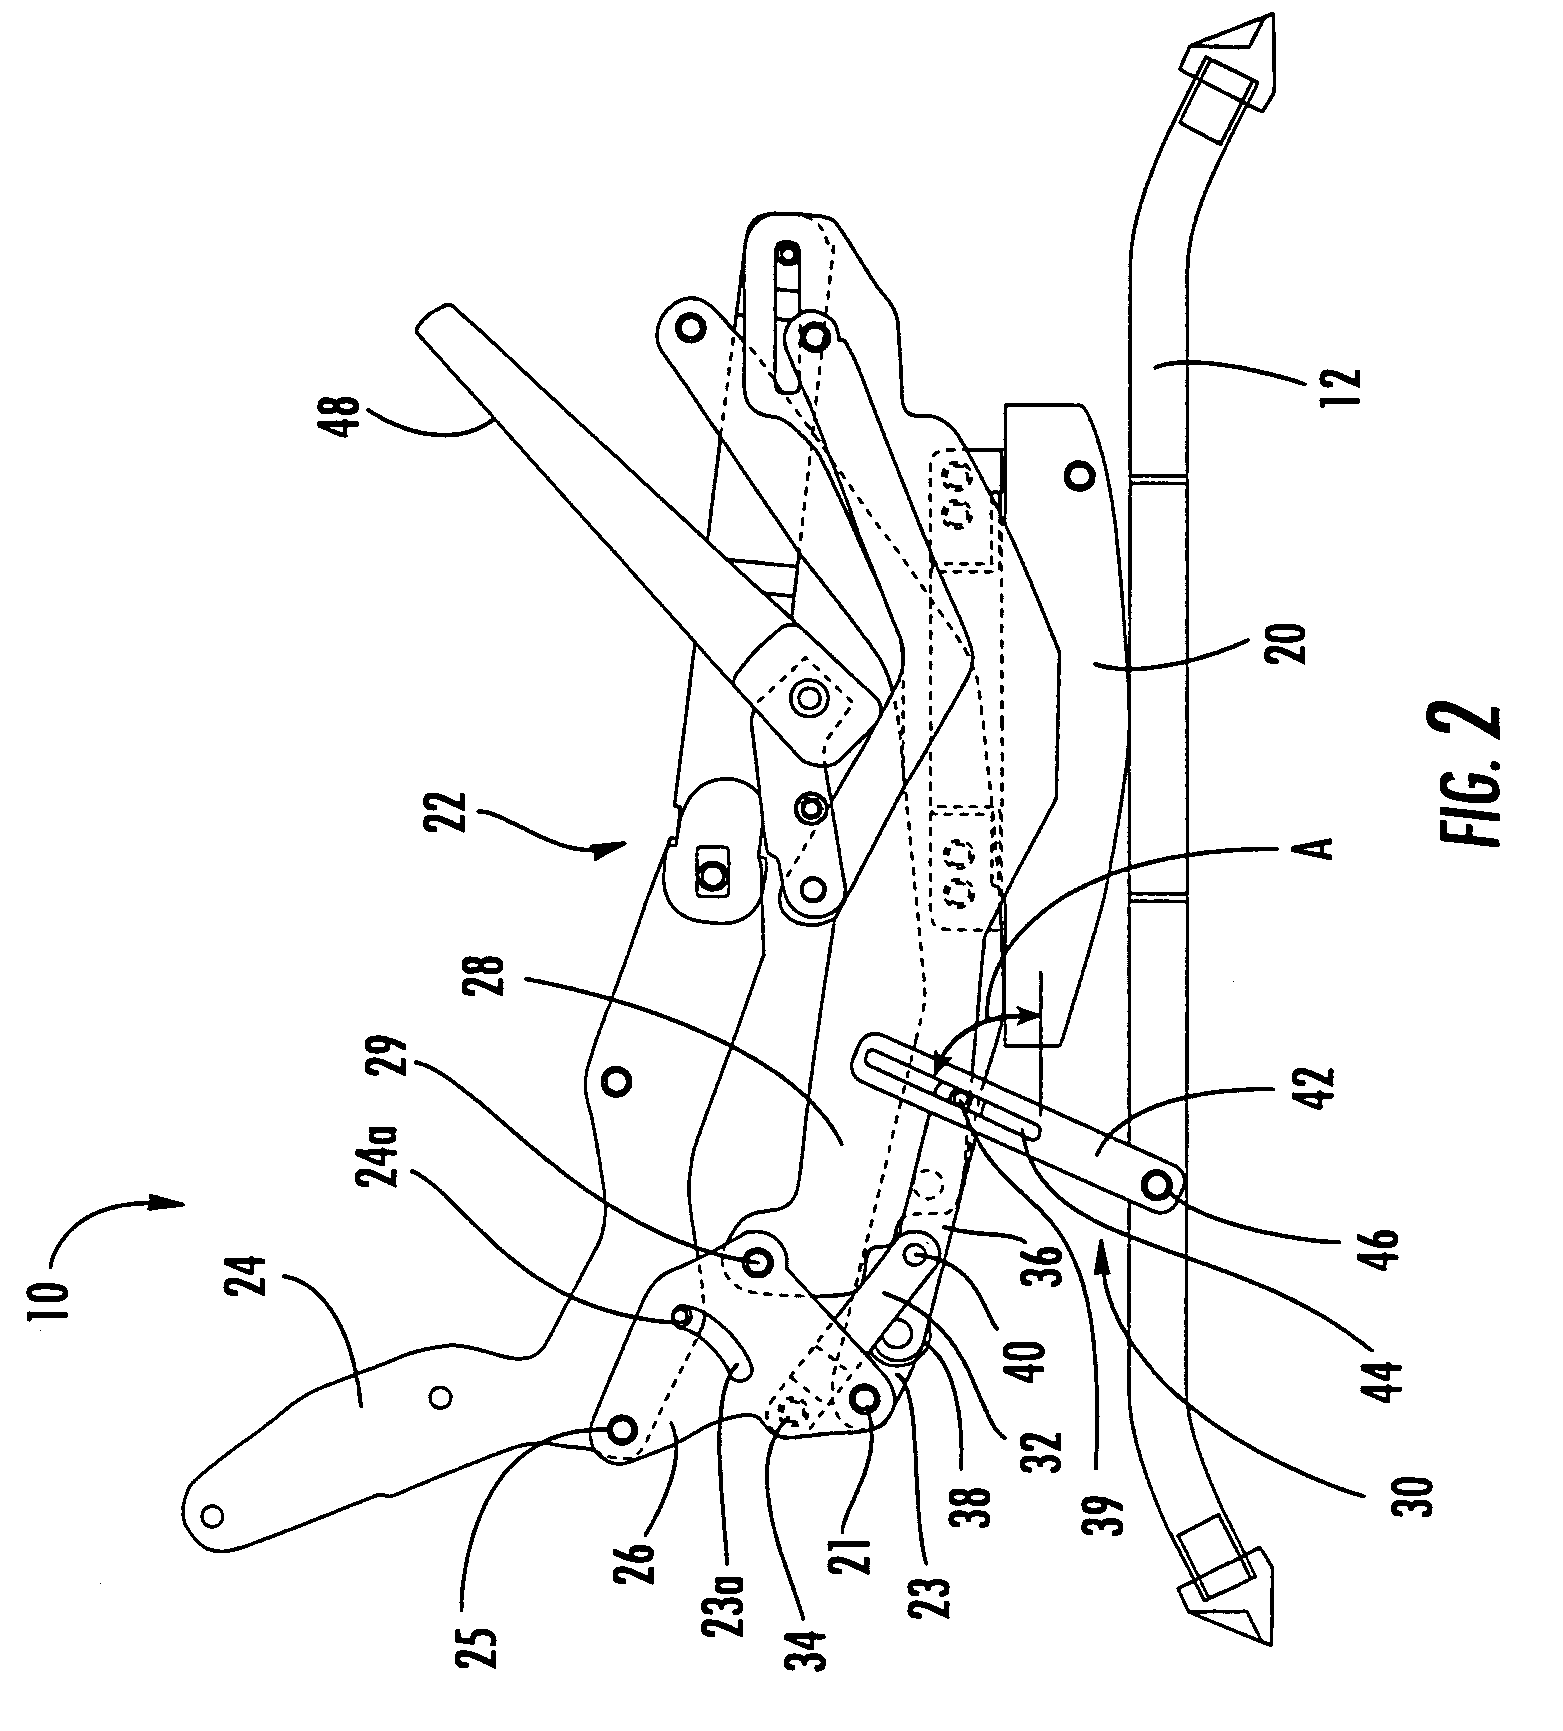 Rocking-reclining seating unit with motion lock